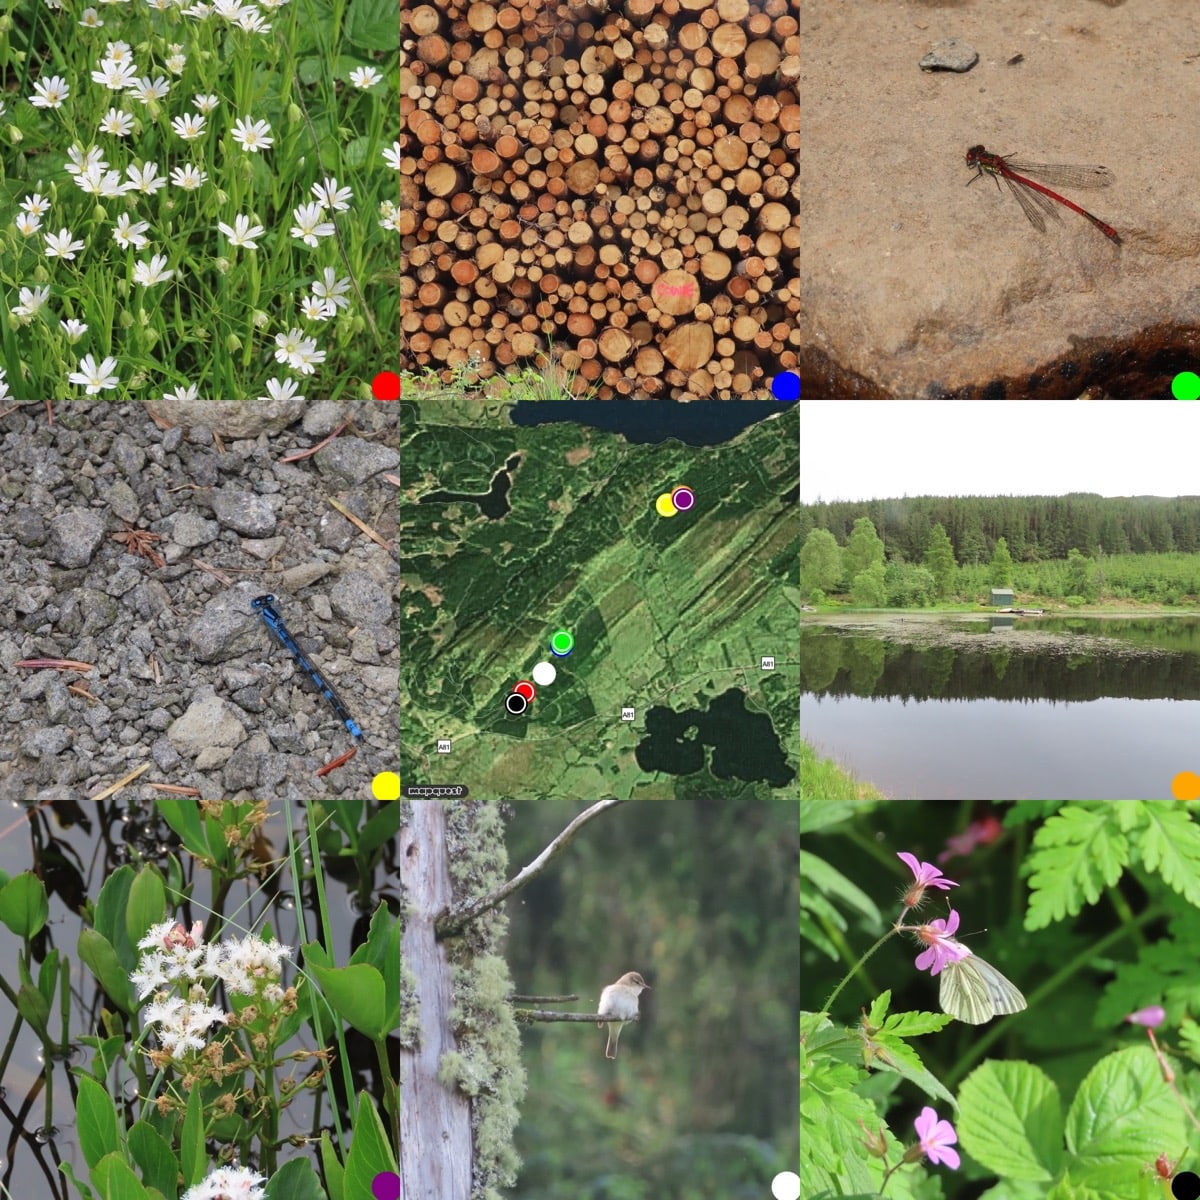 grid of photos 3 x 3 round a map of where they were taken. From Top Left: Stitchwort. stack of cut logs; Large Read Damselfly;common blue damselfly; map; fishing hut across the stank;Bogbean;willow warbler or chiffchaff; Green Veined white butterfly.